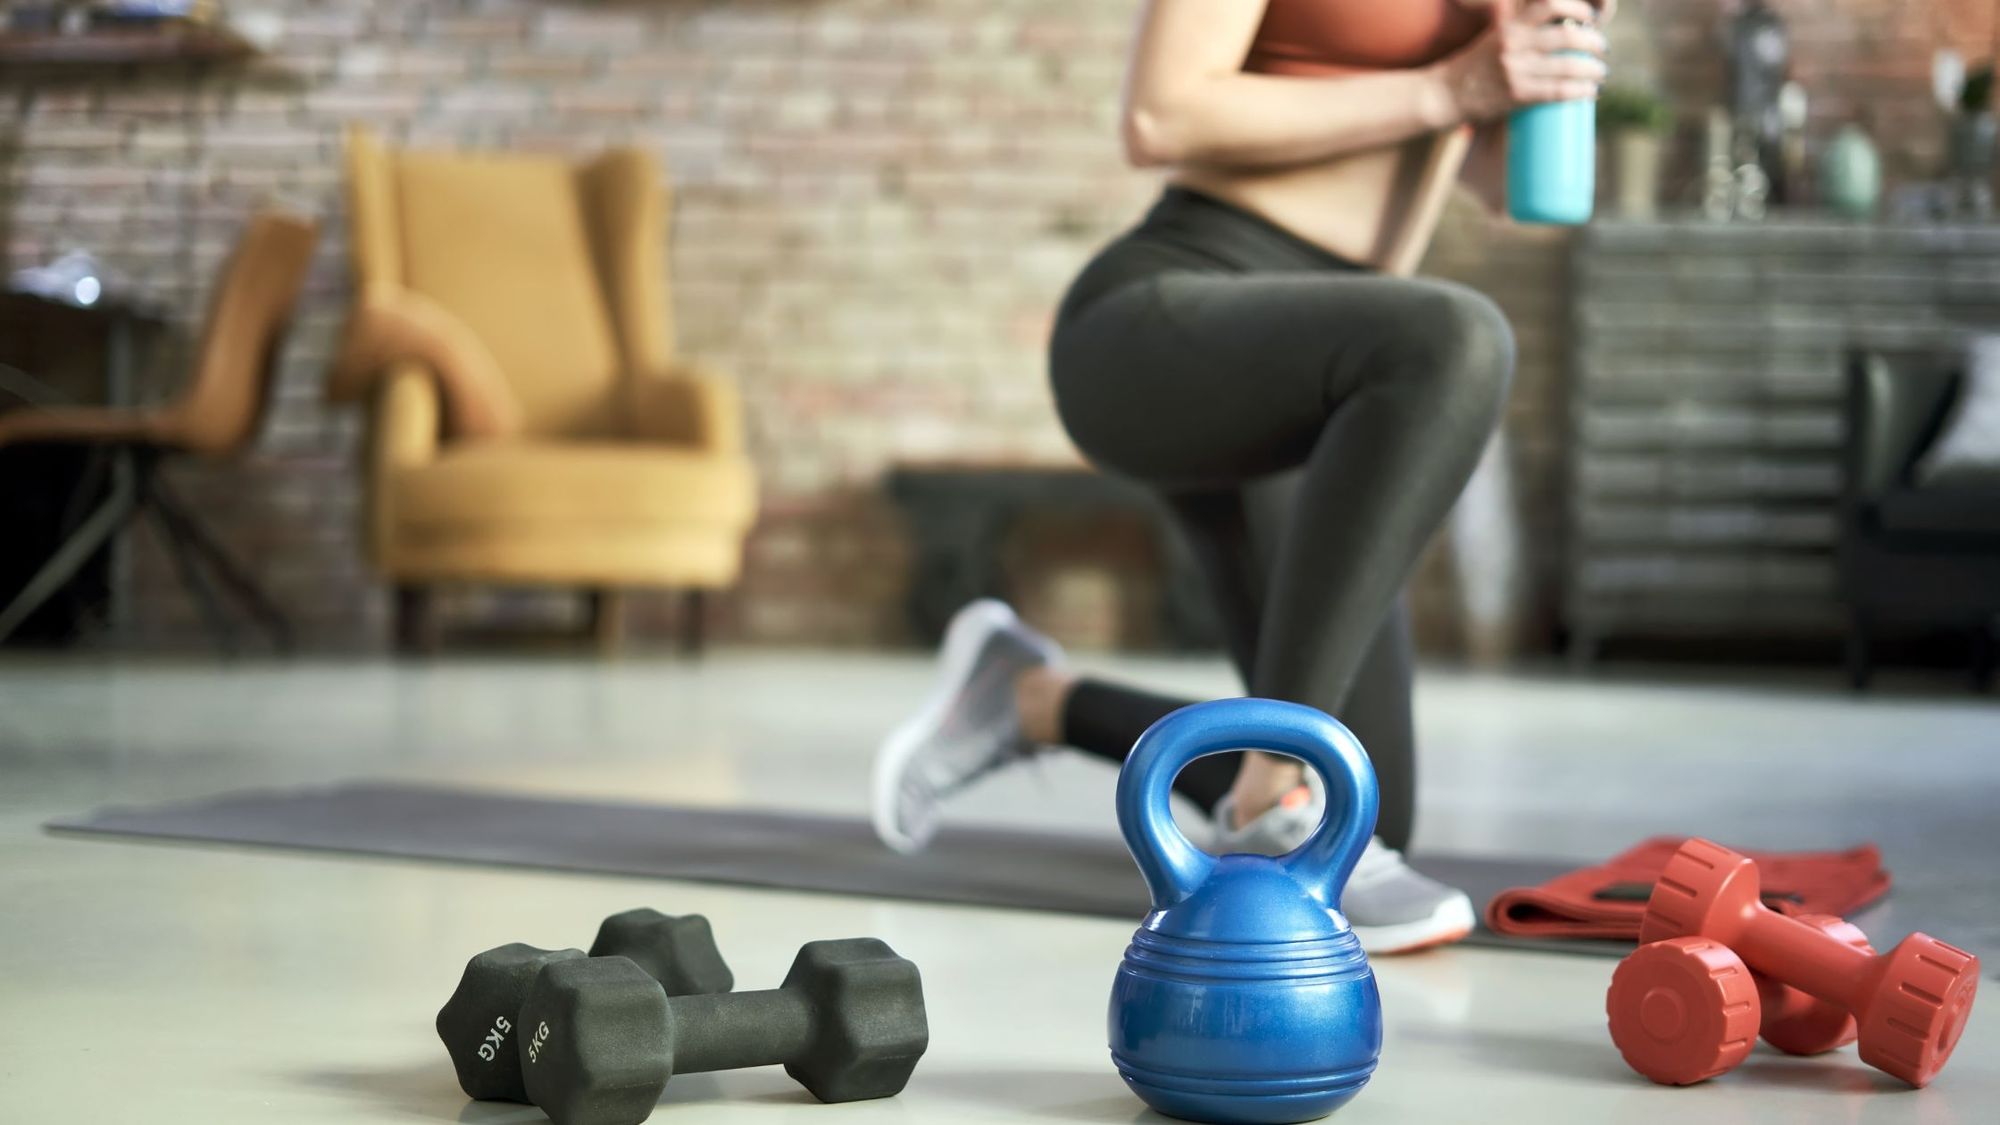 7 Best Household Items To Use As Exercise Equipment For Home Workouts -  CircleDNA